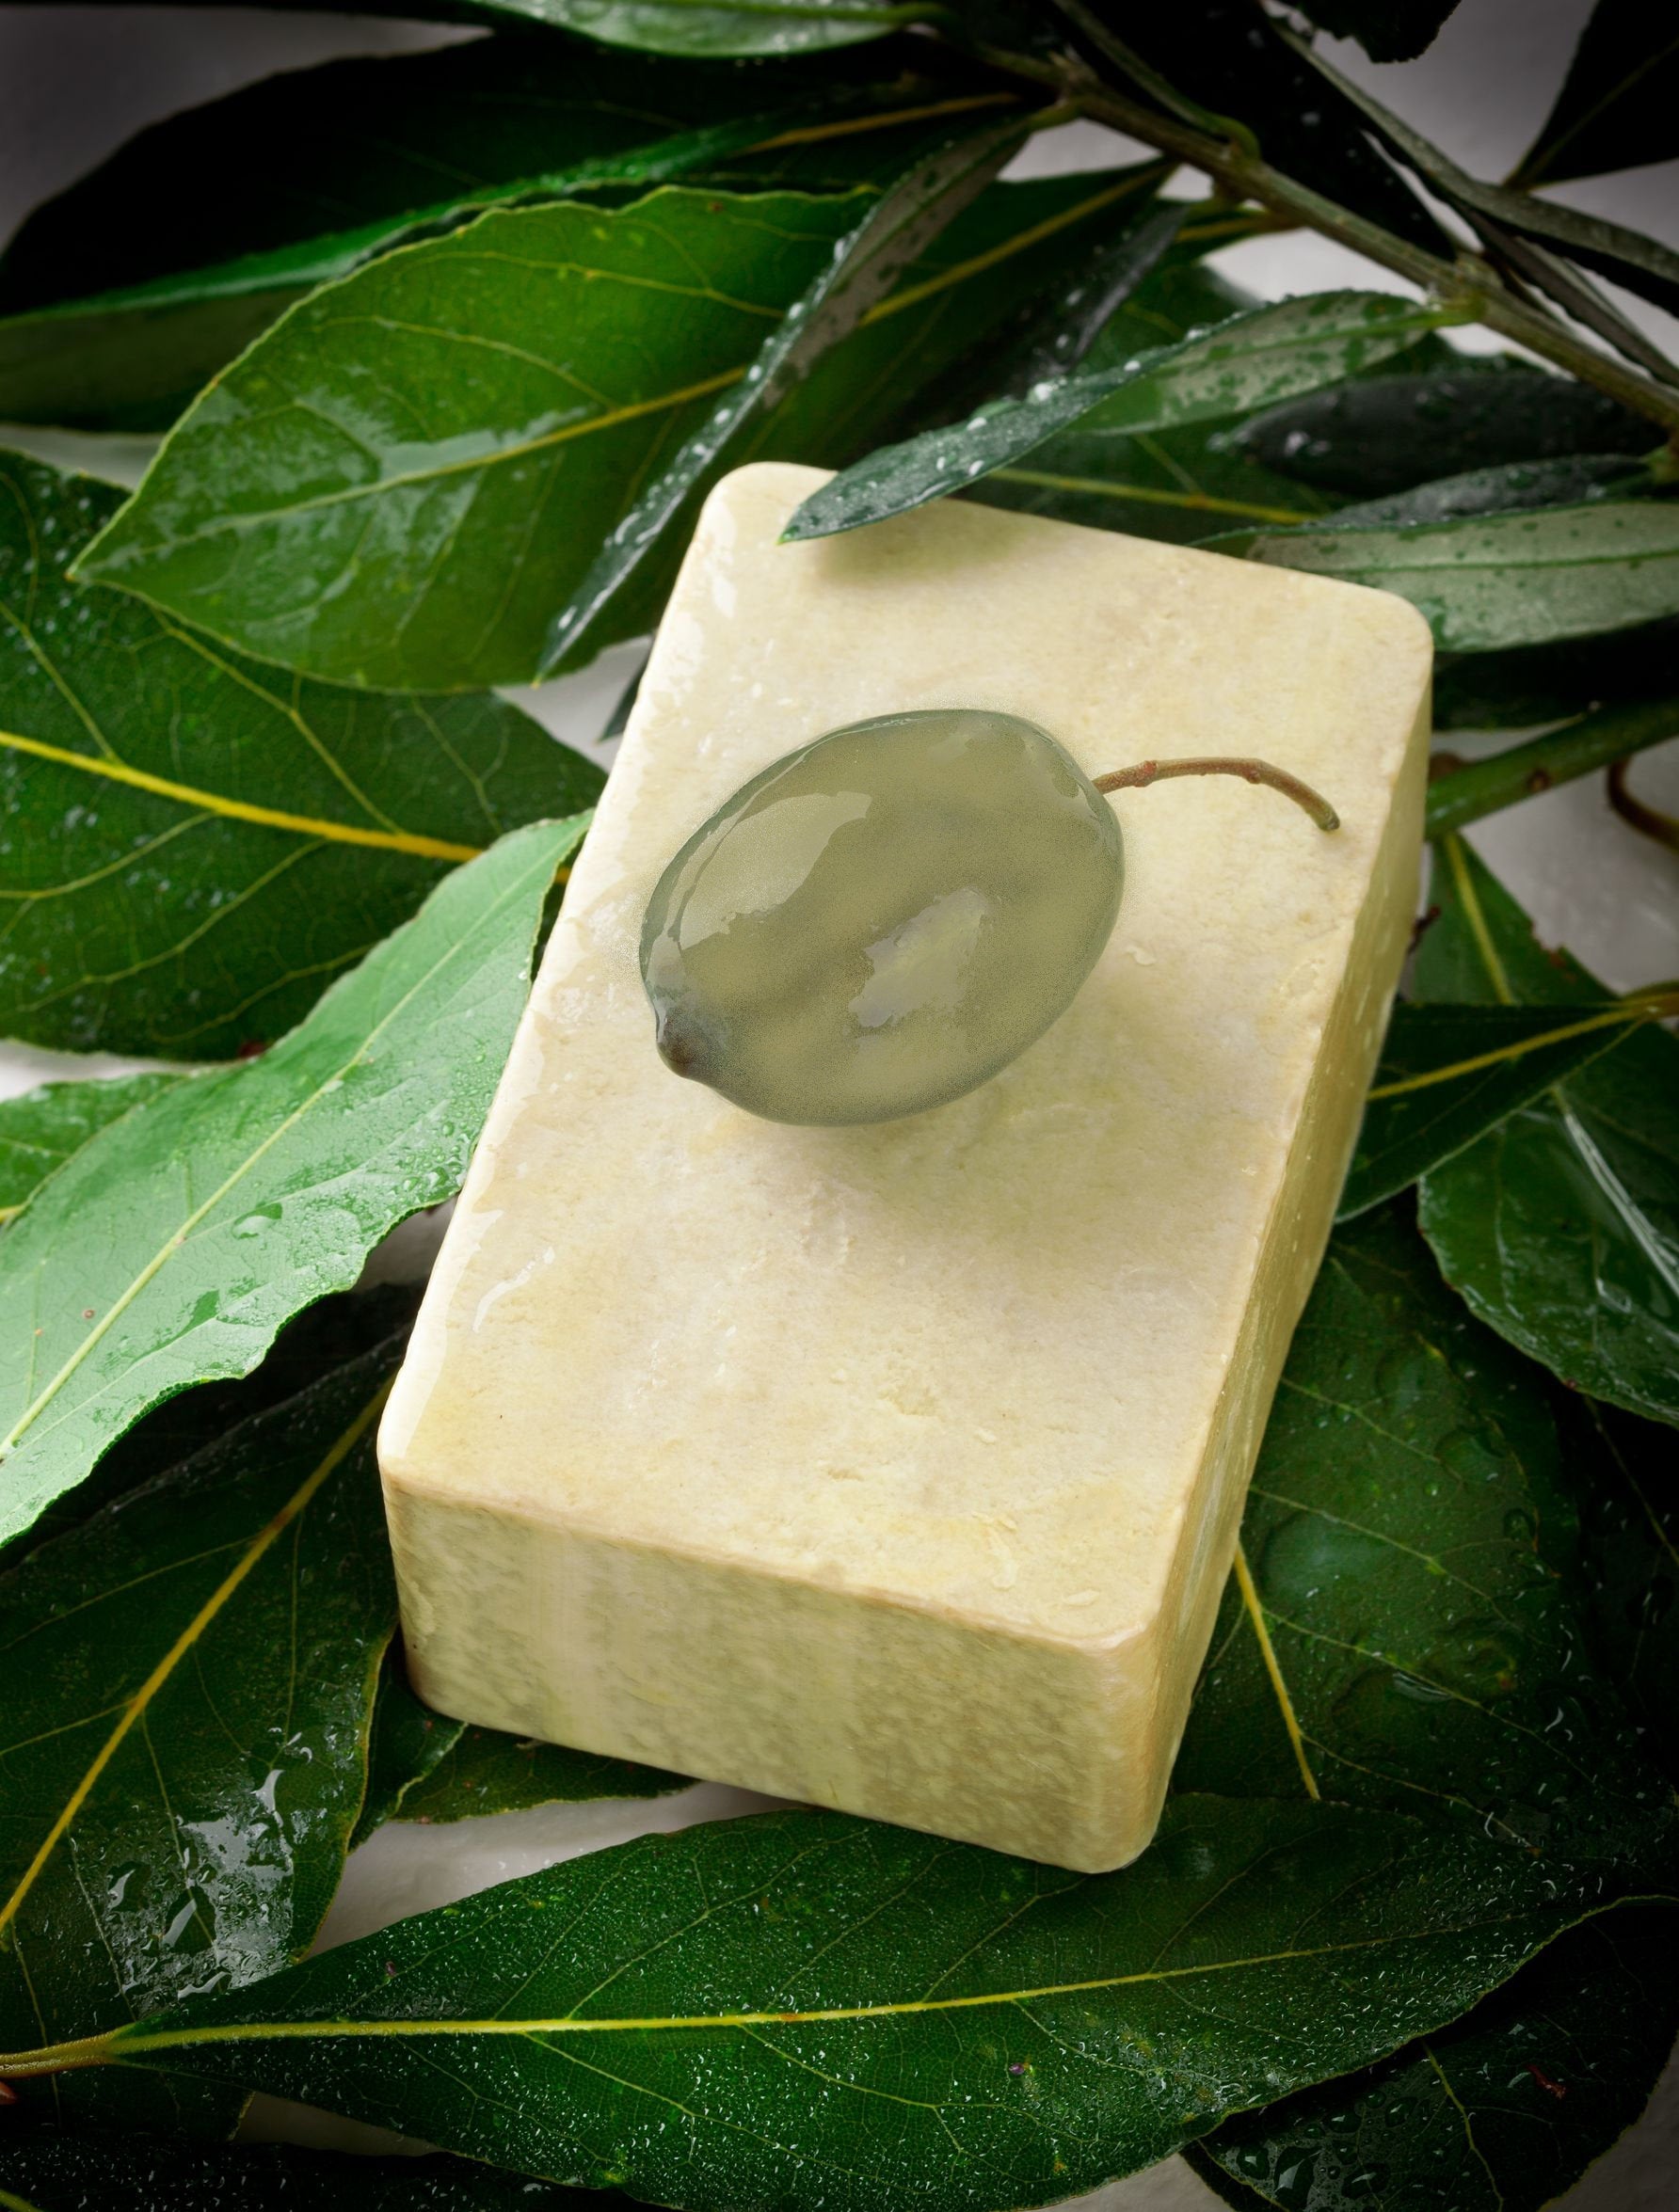 The original Neem Soap. Organic and presrvative free this Neem Soap is great ofr all skin issues. Essential oils have been added to help with the stron scent in thsi bar of organic Neem Soap